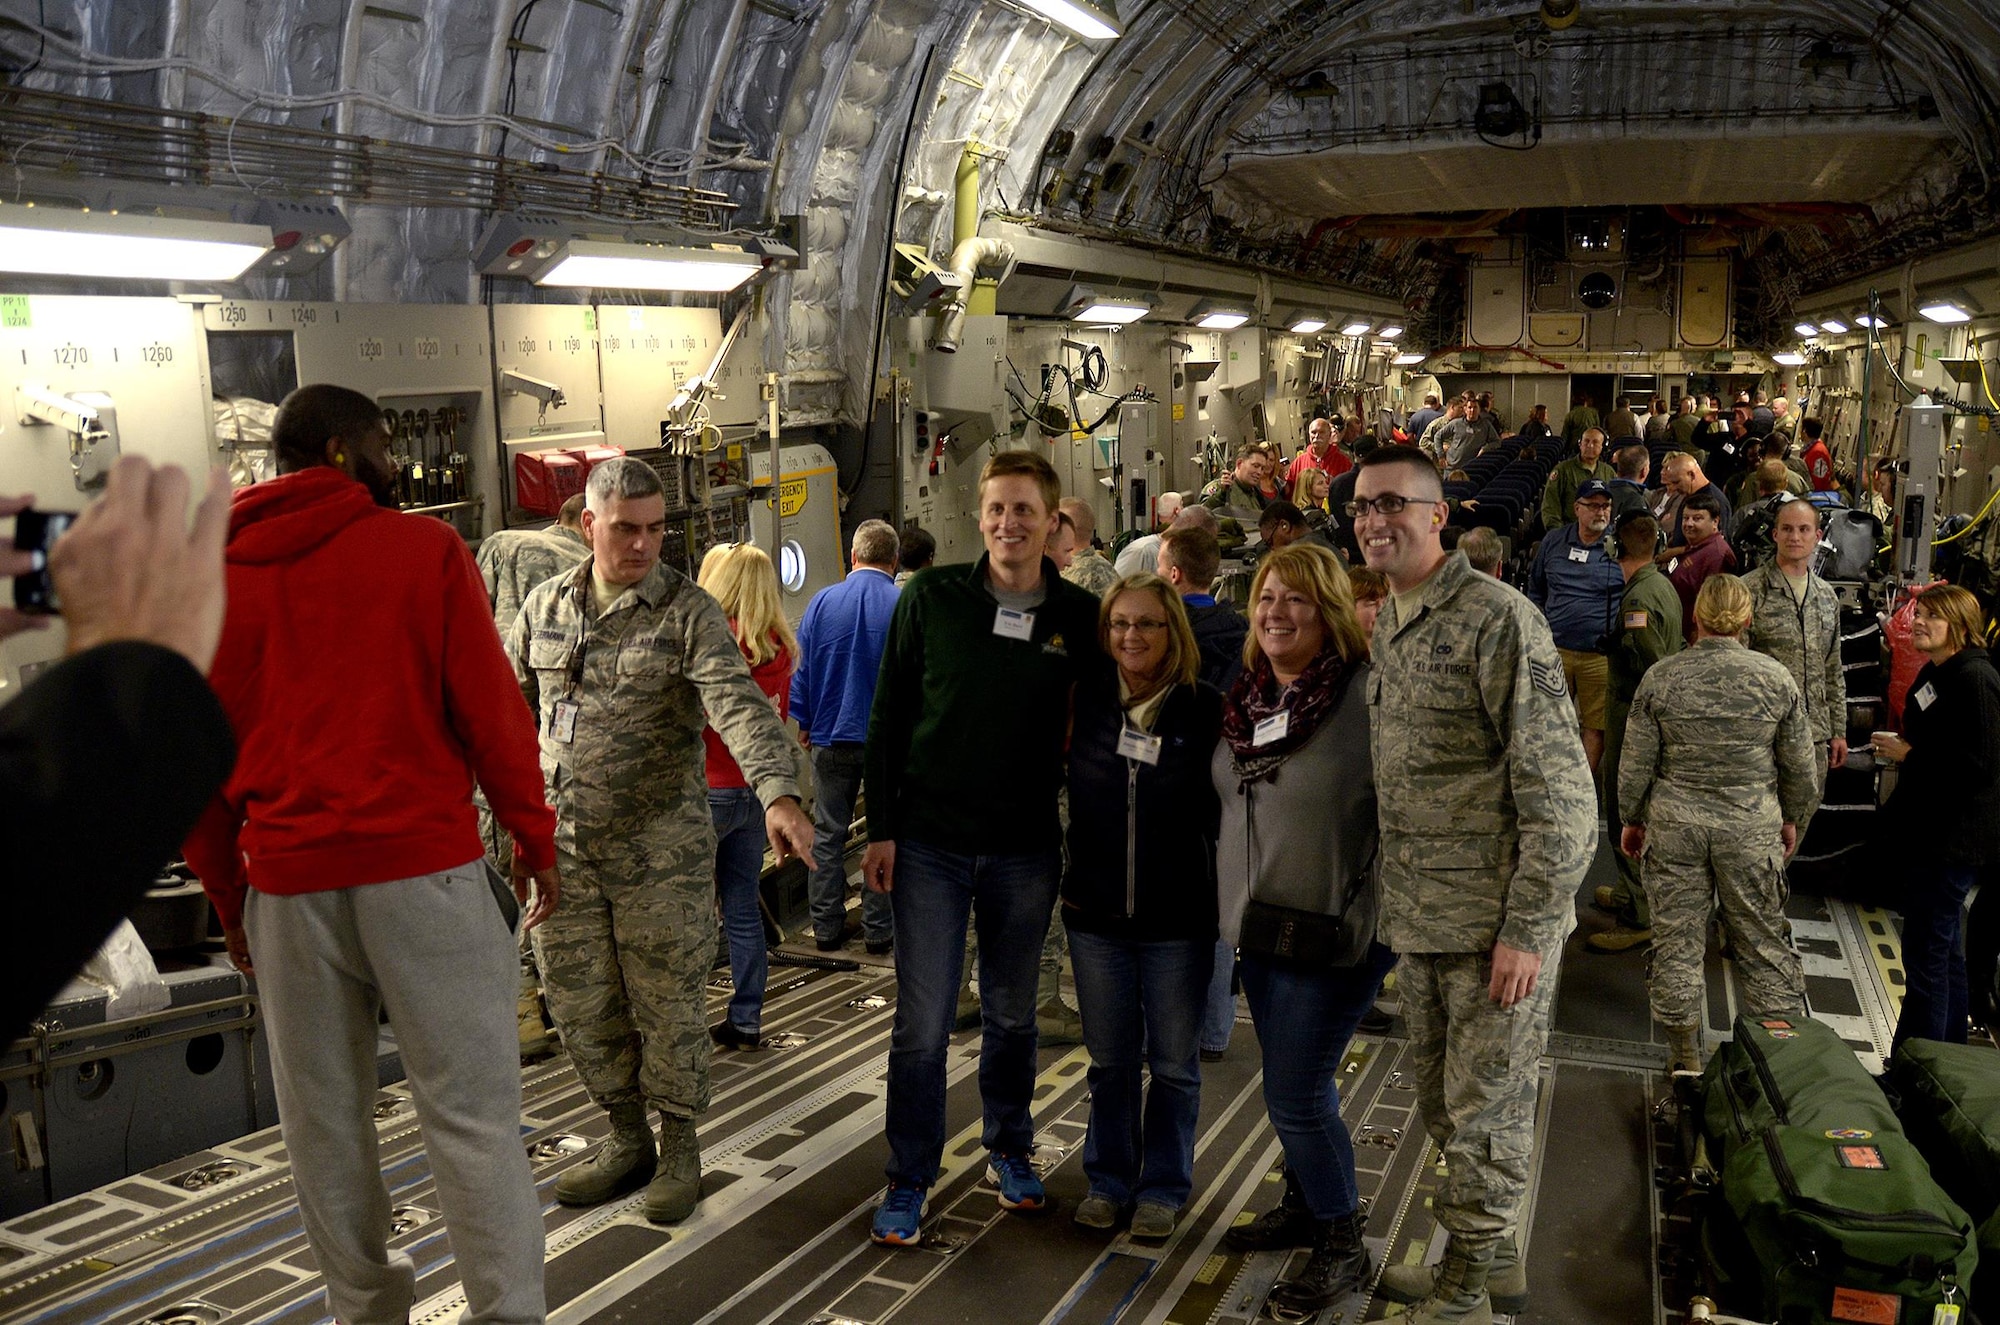 Approximately 70 civilian employers had the opportunity to learn what their military employees do during the 445th Airlift Wing’s Employers Day held Nov. 5, 2016. The employers, joined by 35 reservists, enjoyed breakfast and lunch, received a C-17 Globemaster III flight, participated in tours and demonstrations of the different jobs and training that their Air Force Reserve employees do when performing military service. The employers also received information about the Employer Support of the Guard and Reserve program.